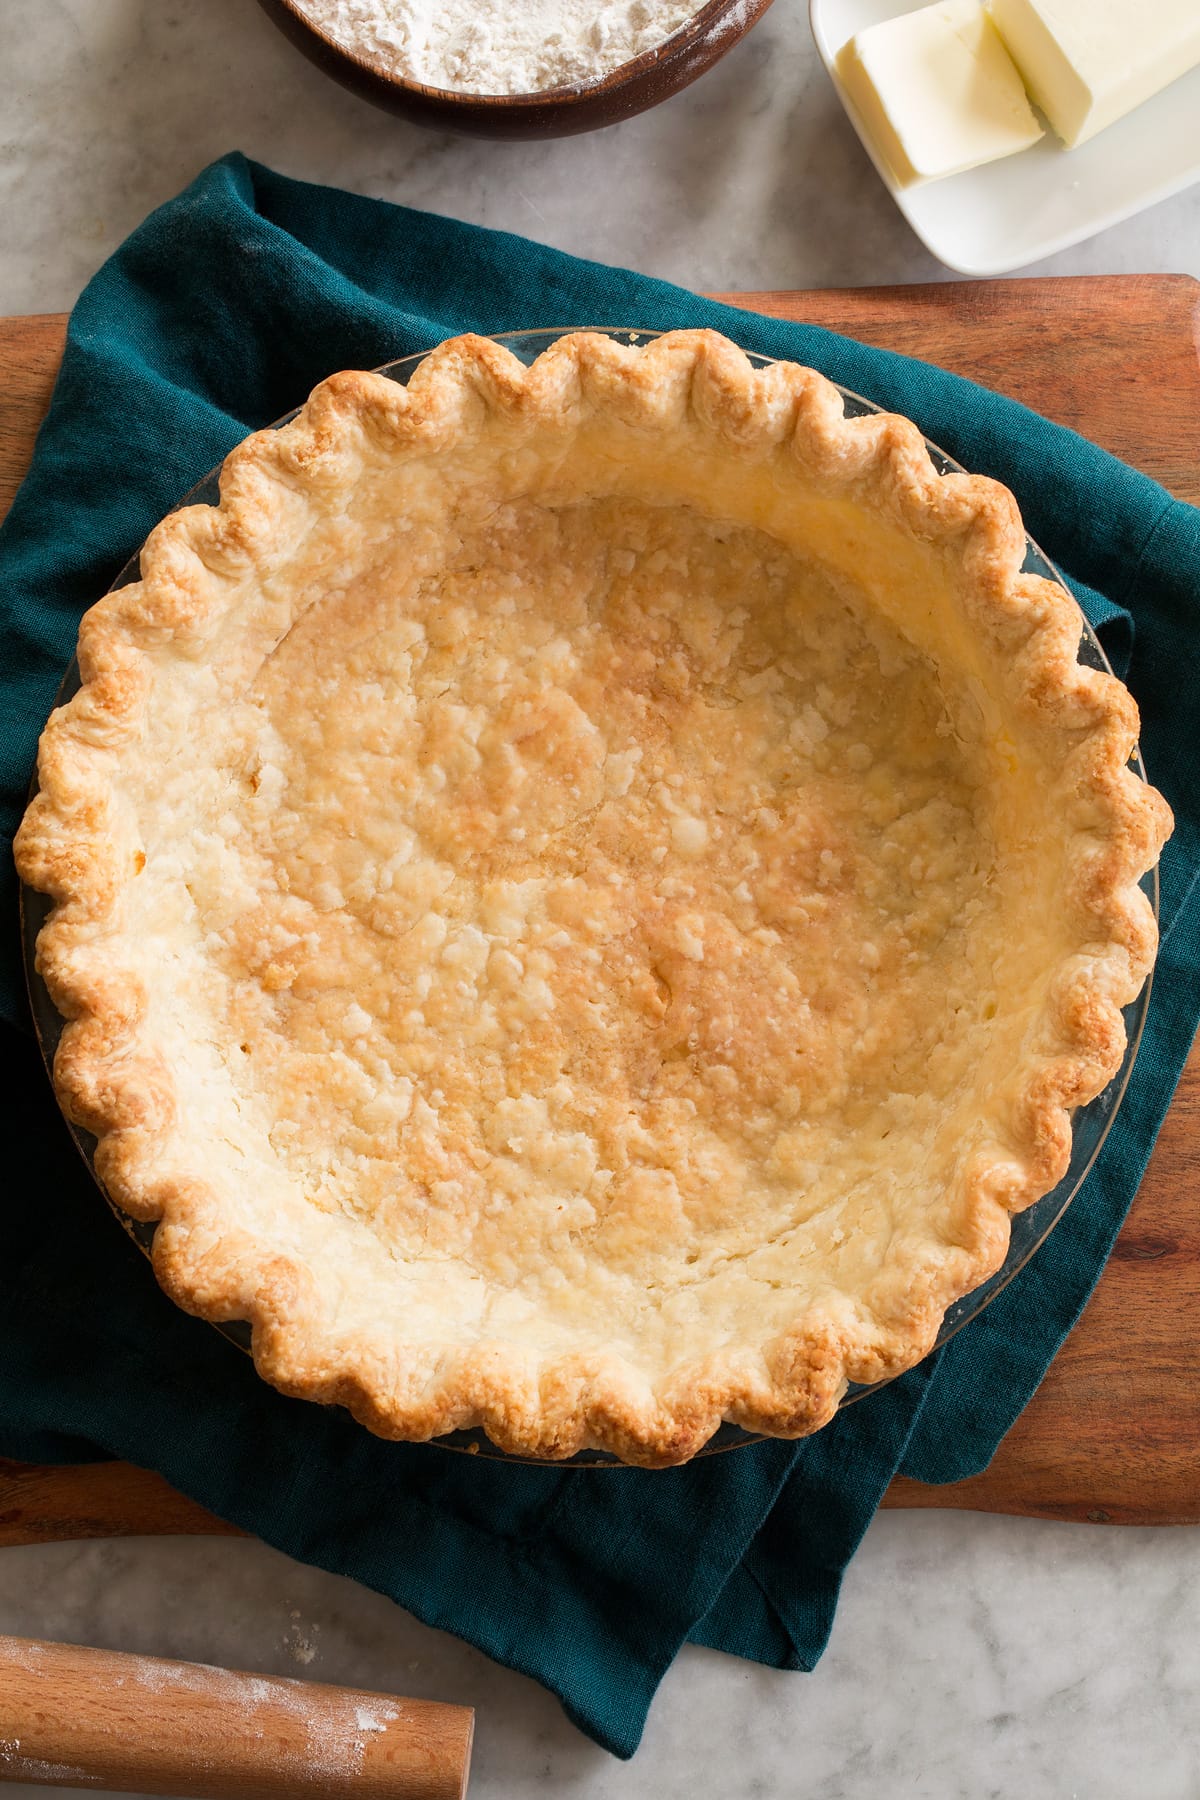 Blind Baked Pie Crust shown from above on a blue cloth and a wooden platter.